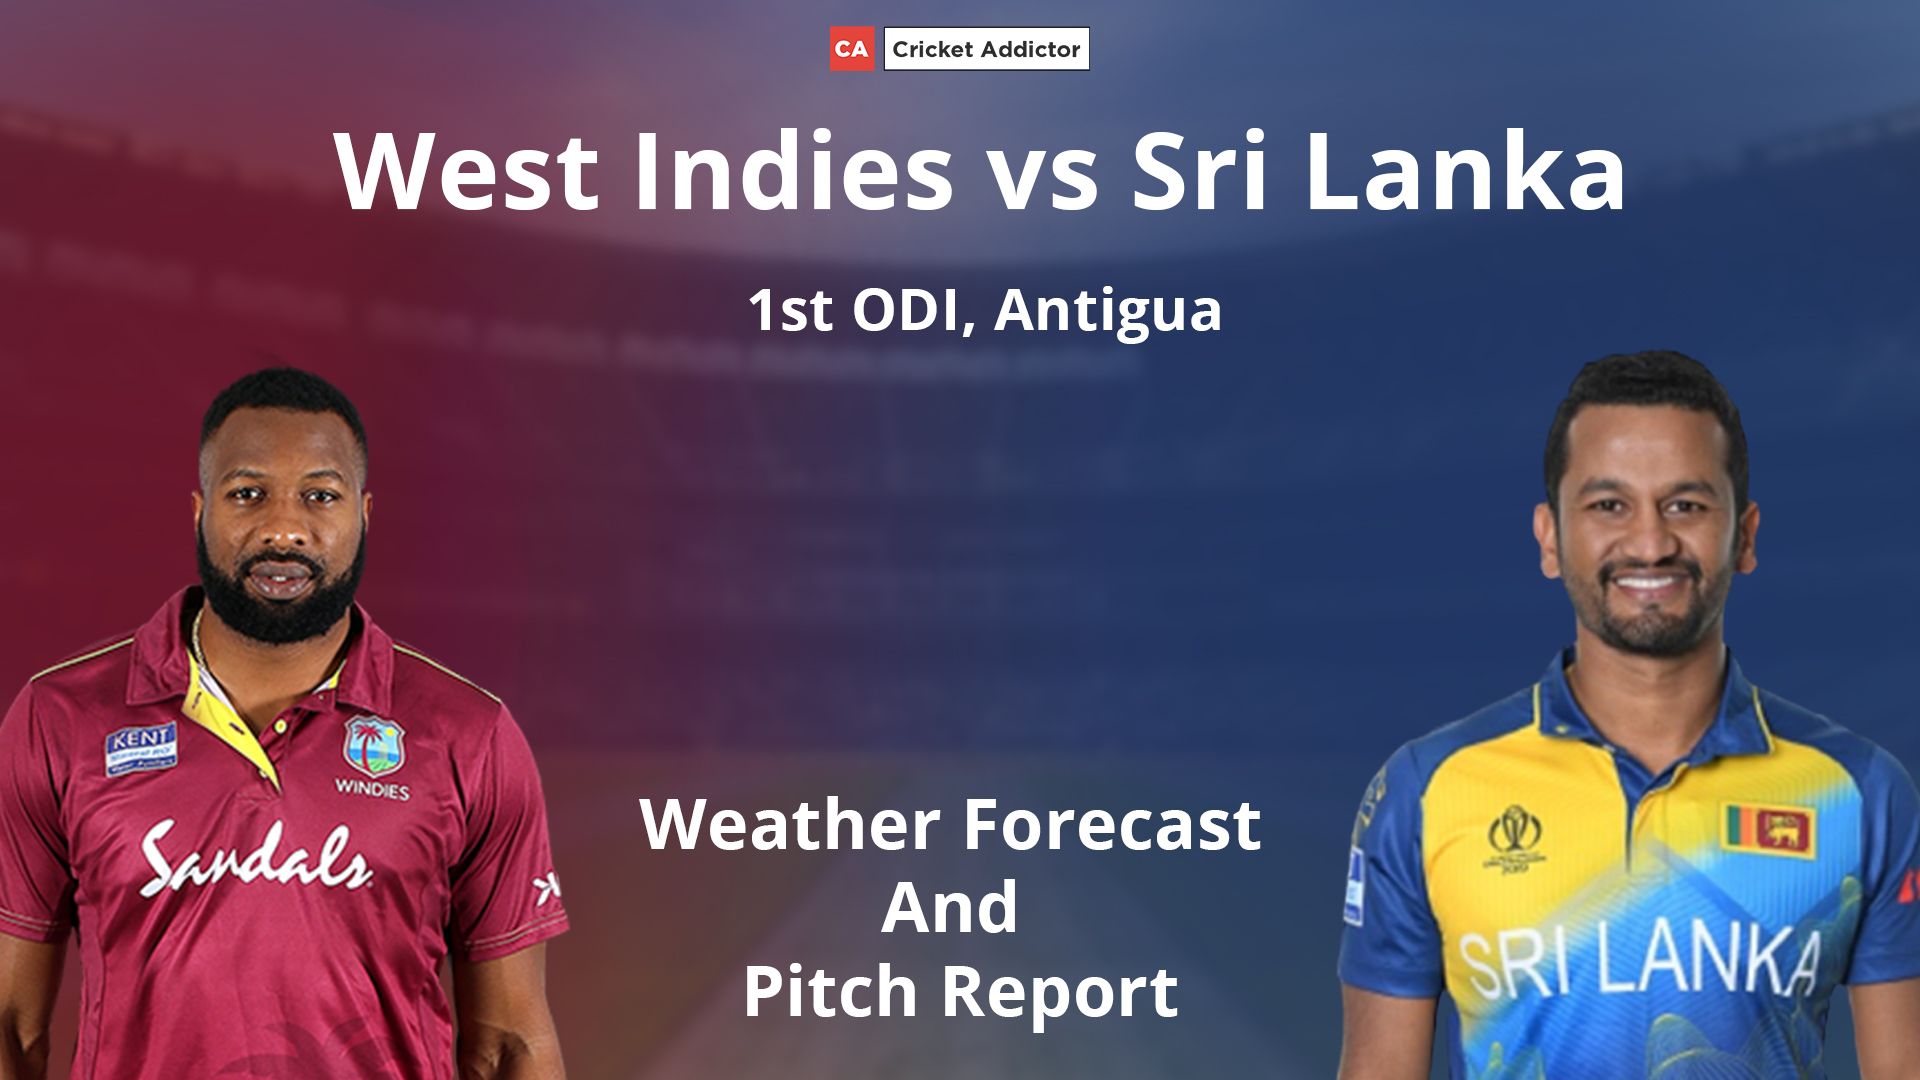 West Indies vs Sri Lanka 2021, 1st ODI: Weather Forecast And Pitch Report